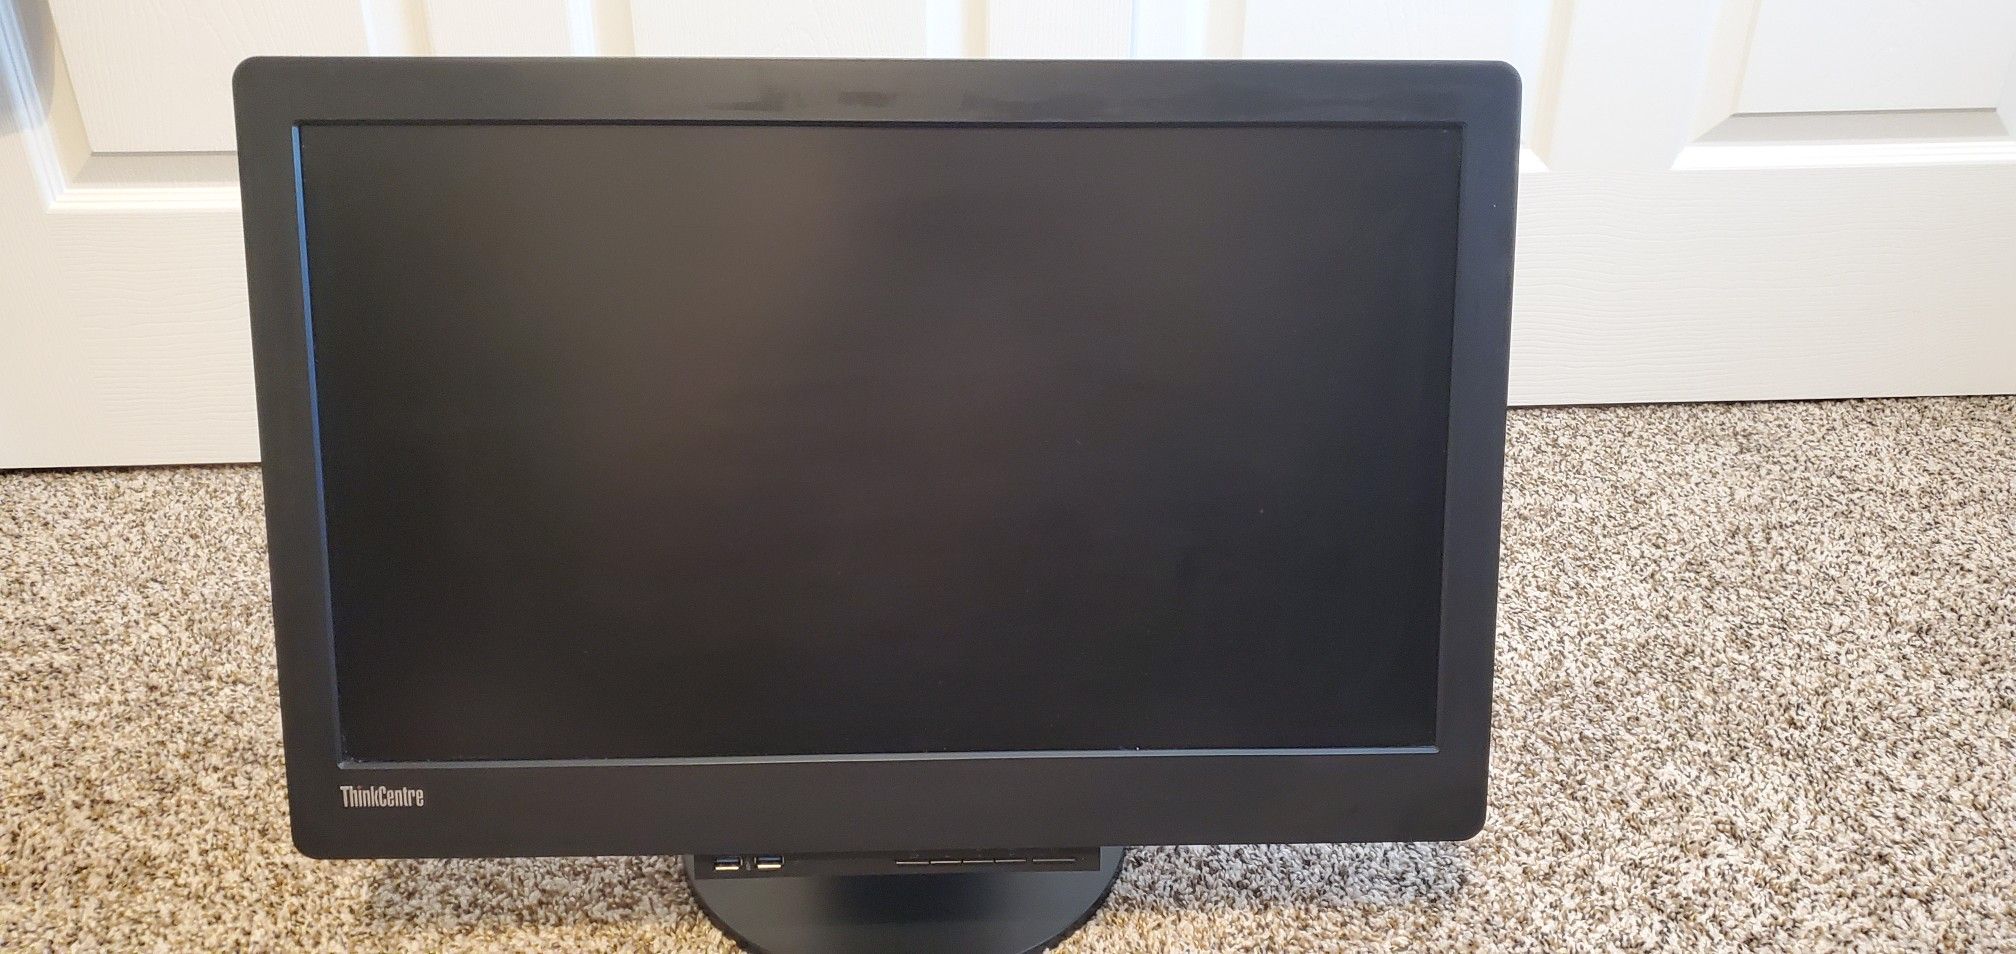 Lenovo M710q Tiny all in one 23 inch screen PC